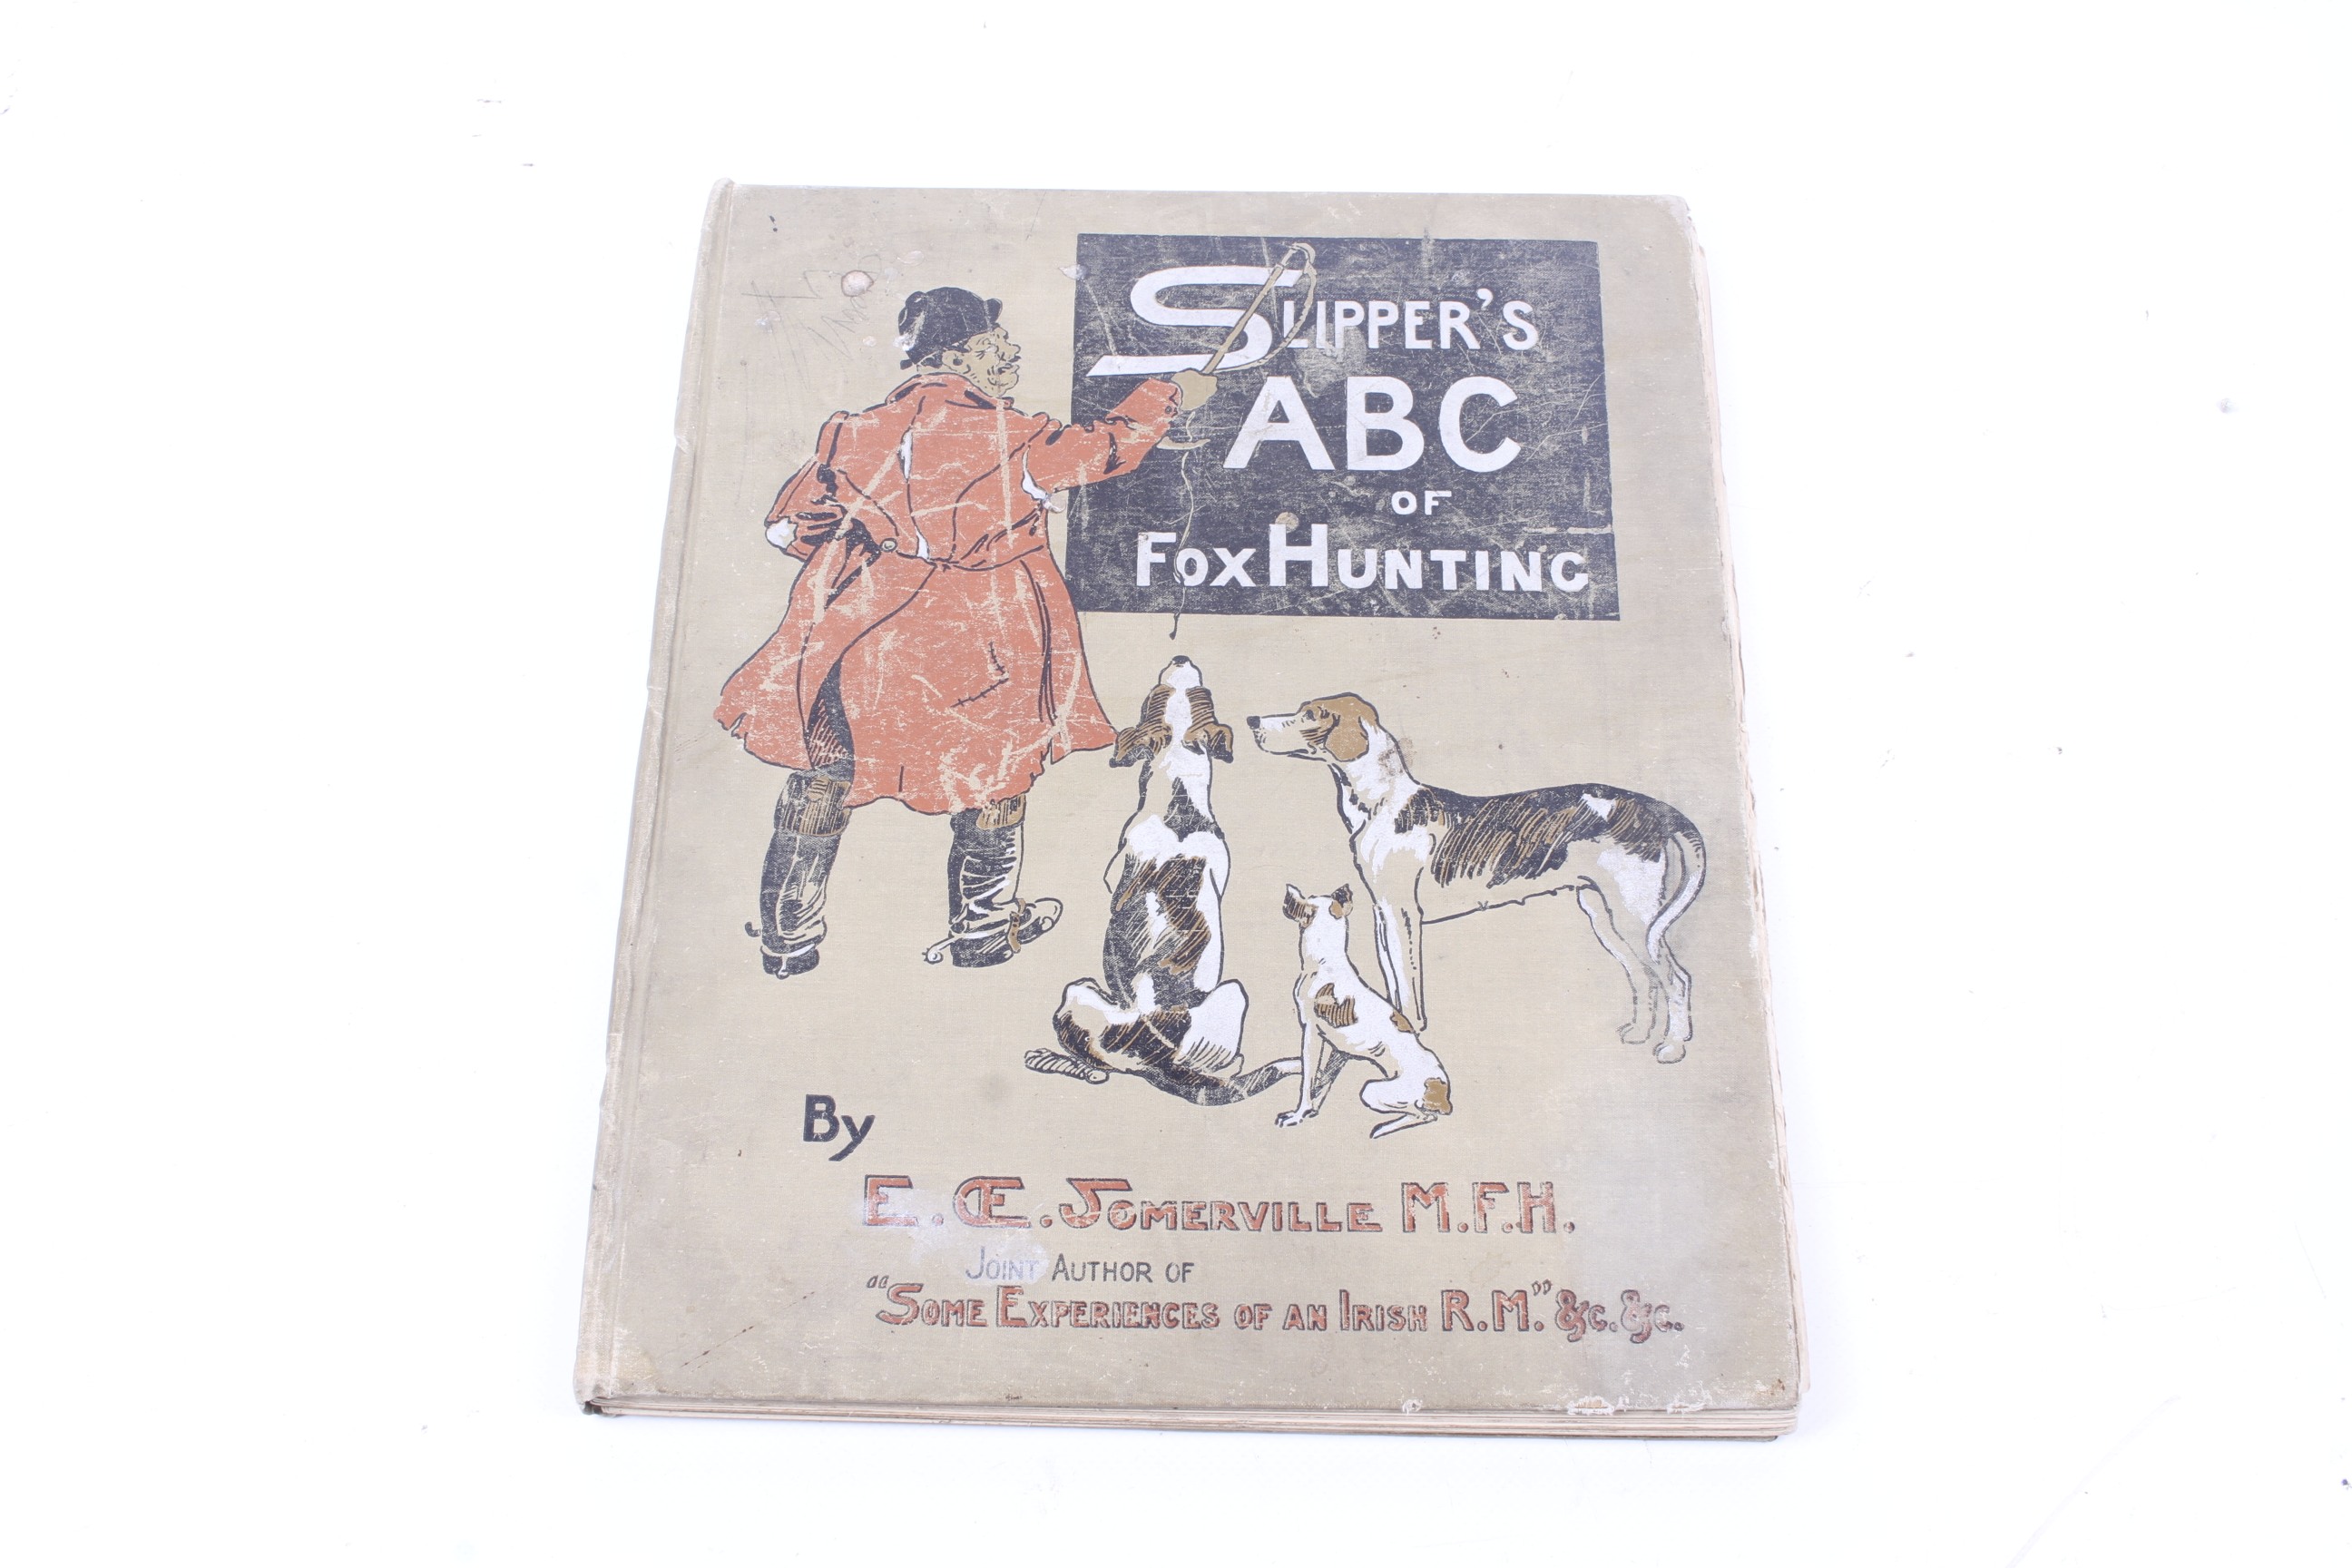 A copy of 'Slippers ABC of Fox Hunting' by E.E Somerville M.F.H.